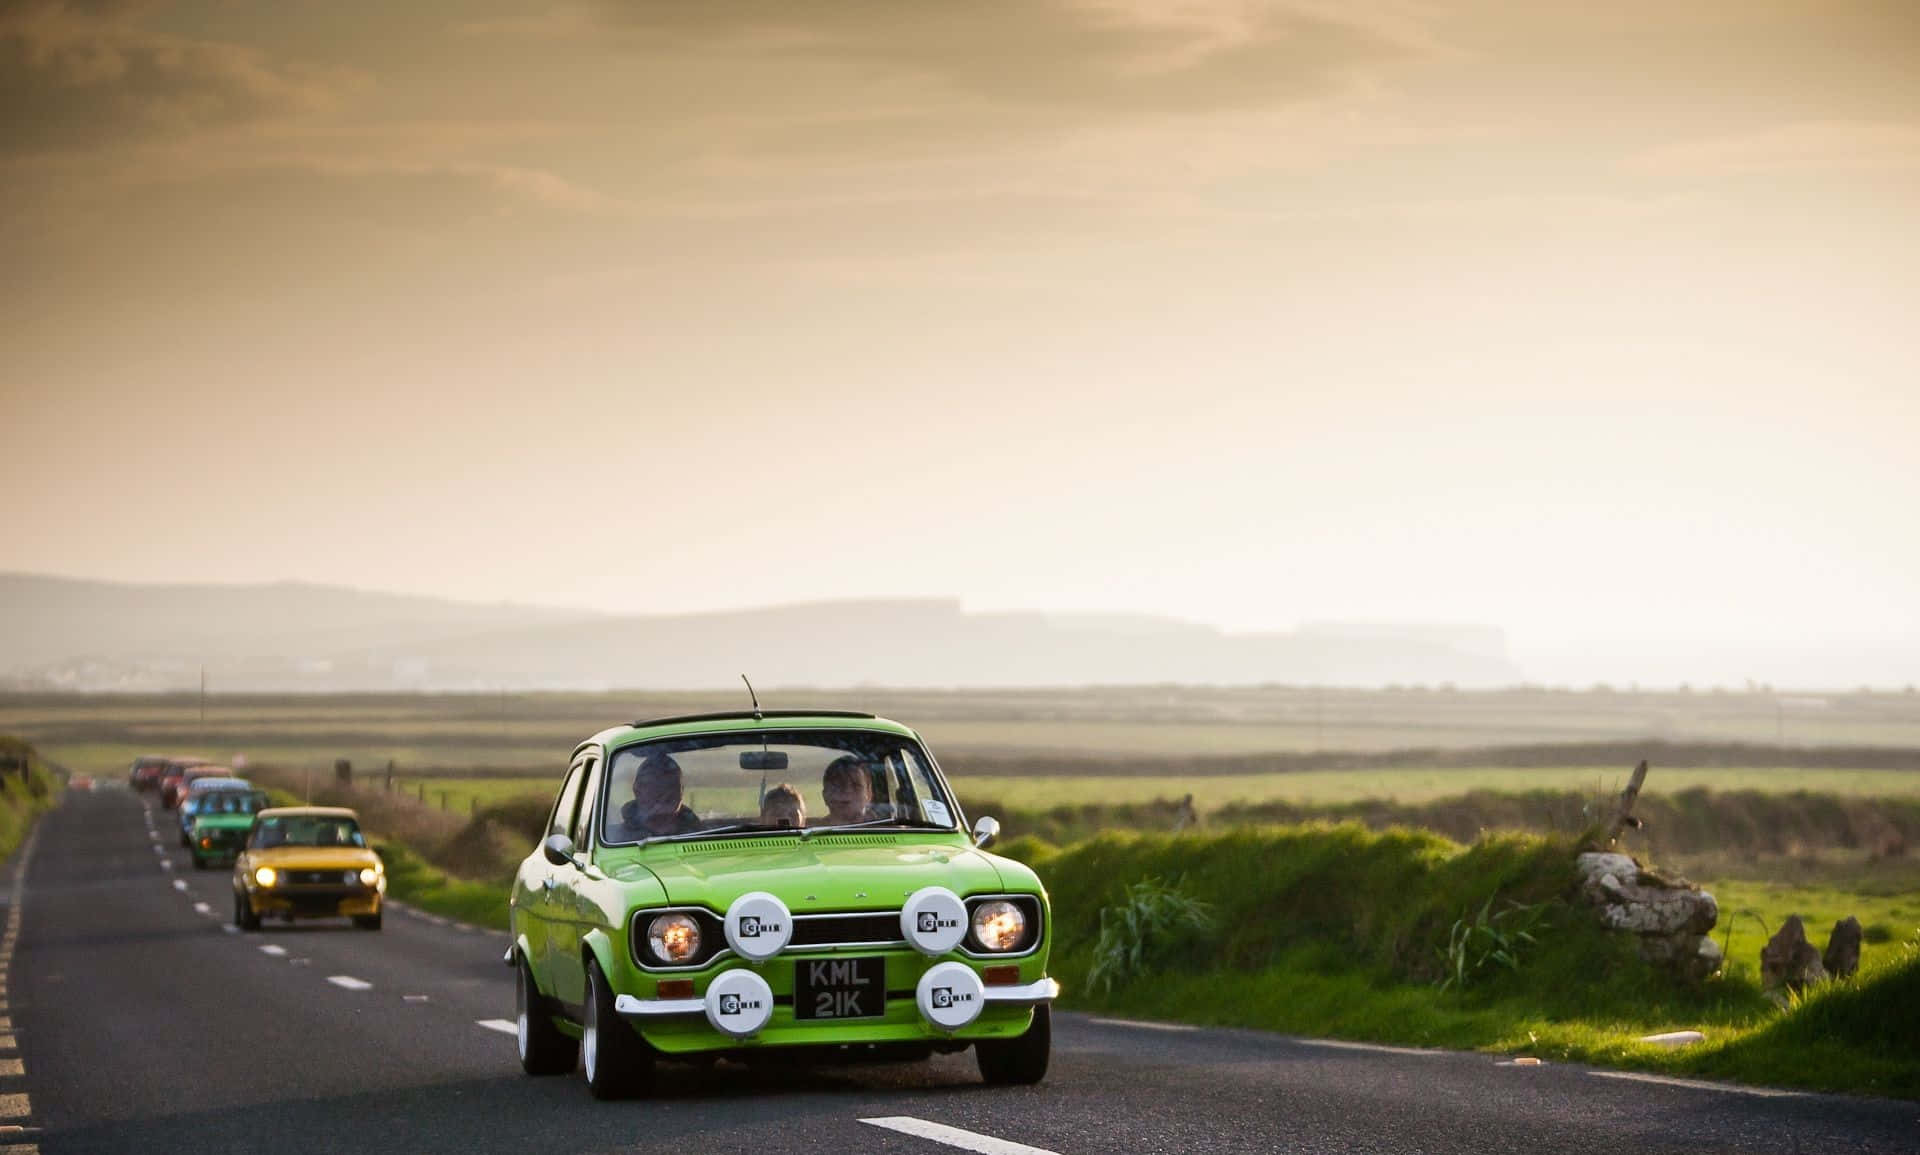 Vintage Ford Escort cruising down the highway Wallpaper